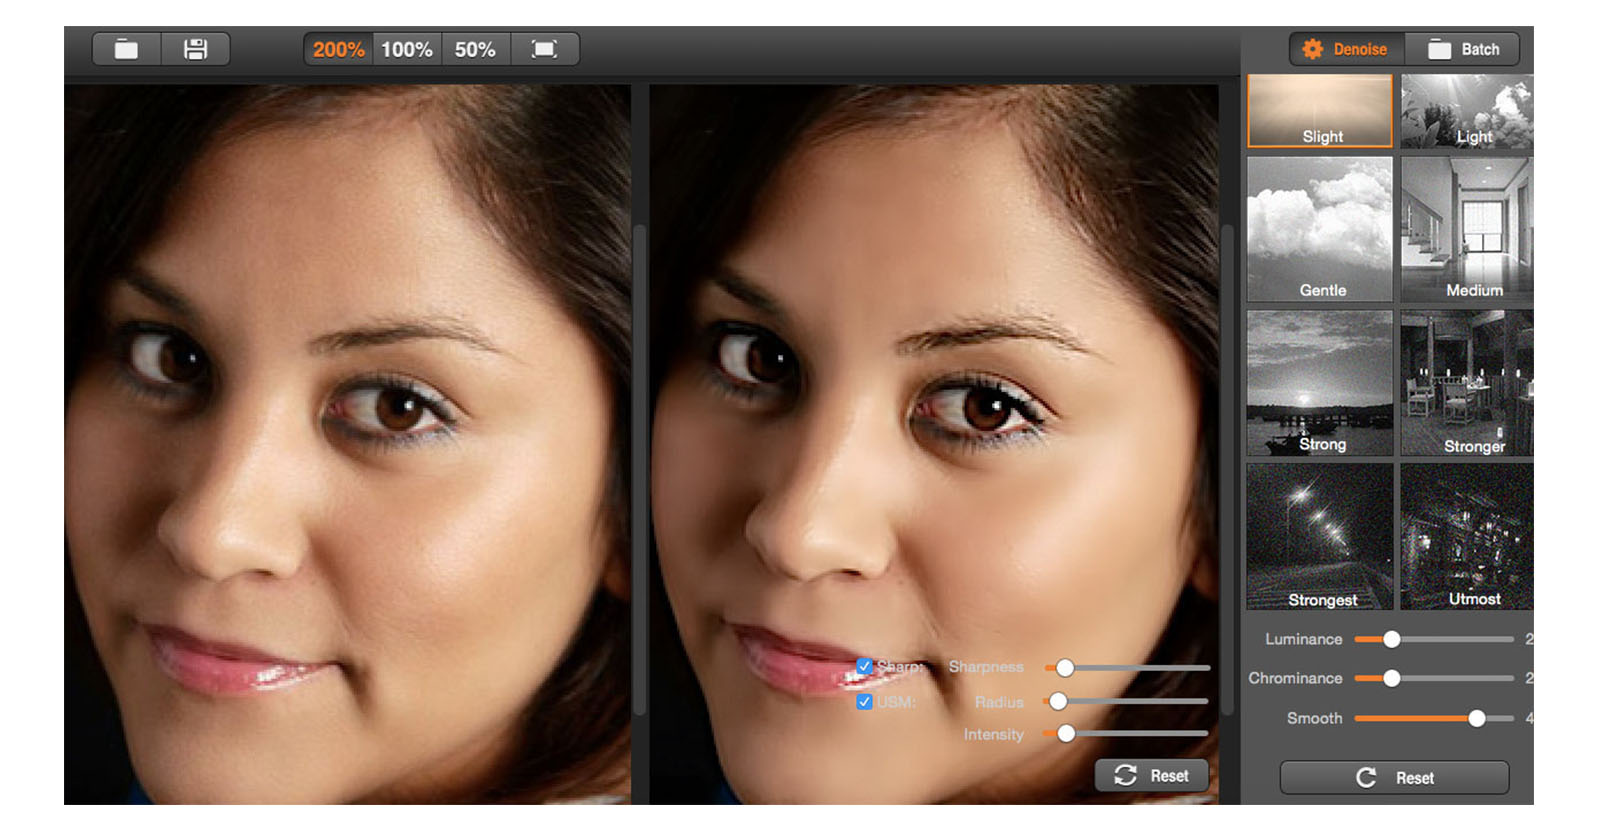 Smooth Skin effects for Mac